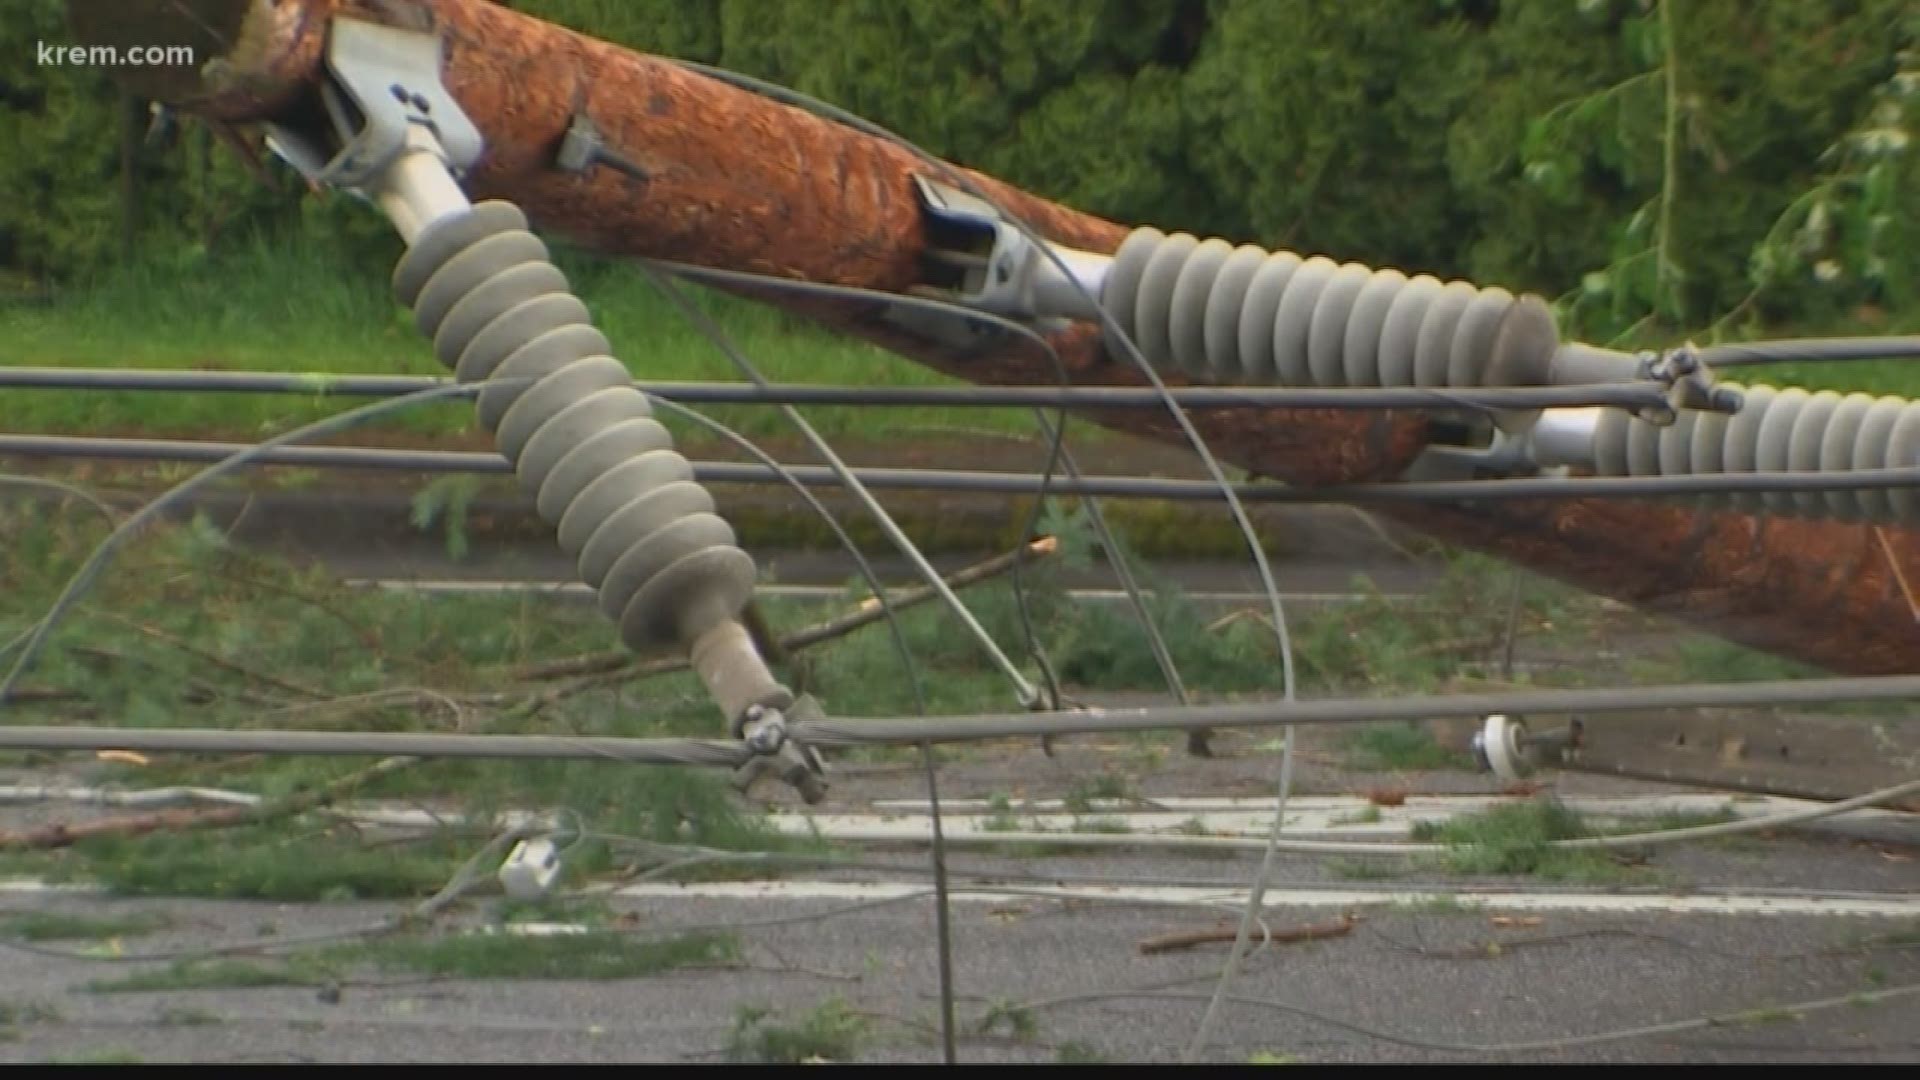 Could placing downed power lines underground prevent the next power outage?